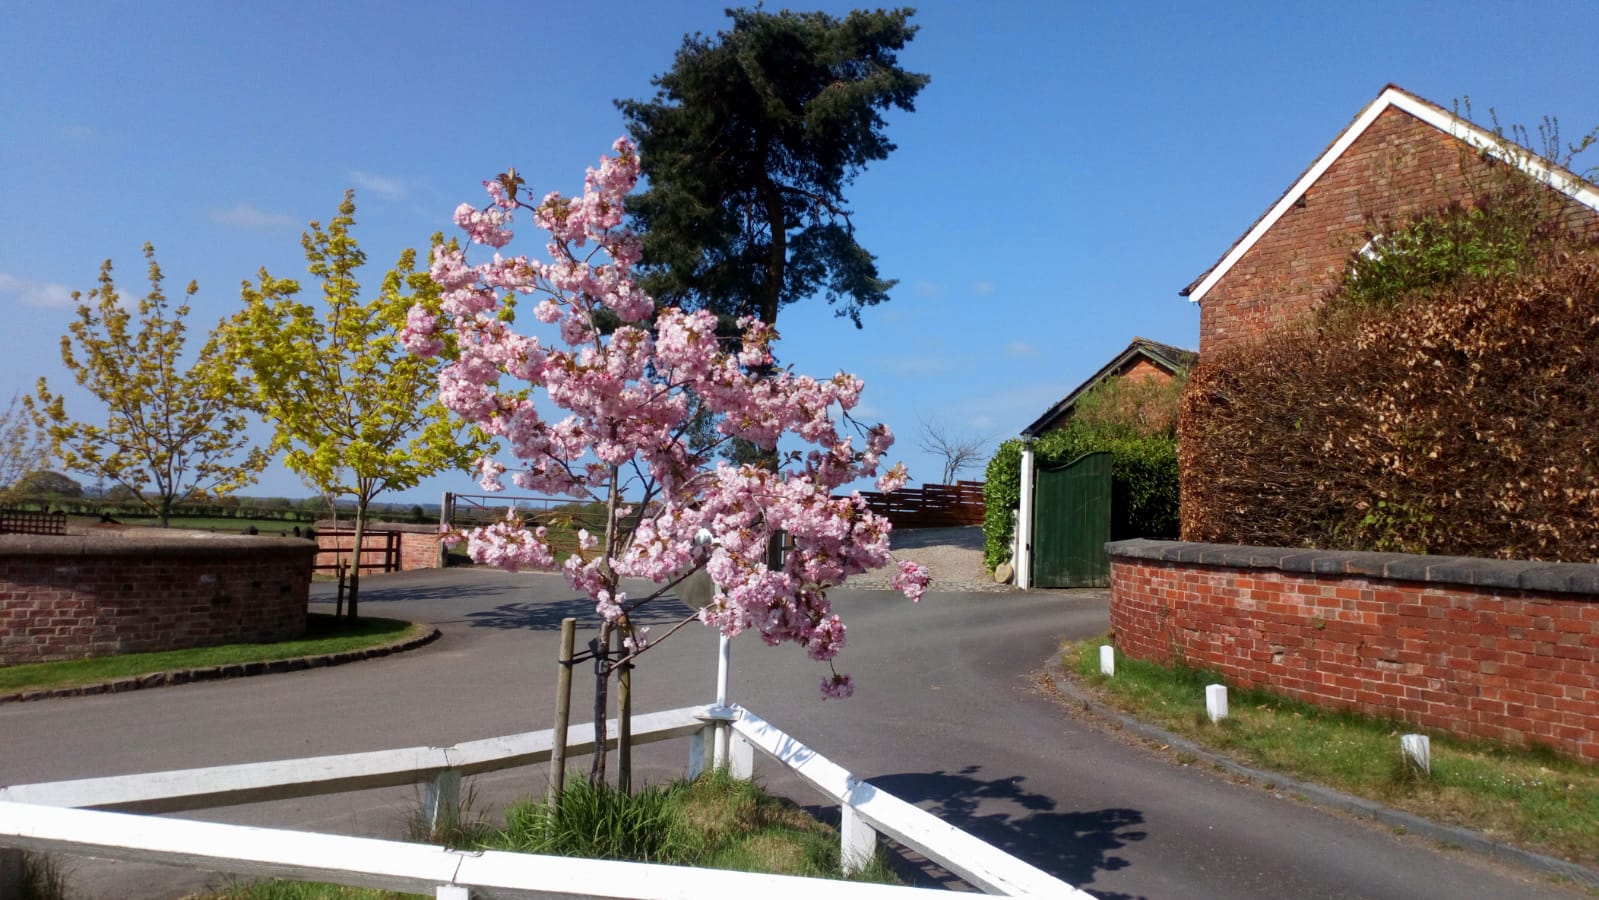 A pleasant view in Hall Lane April 20th (photo by Ian Jones)